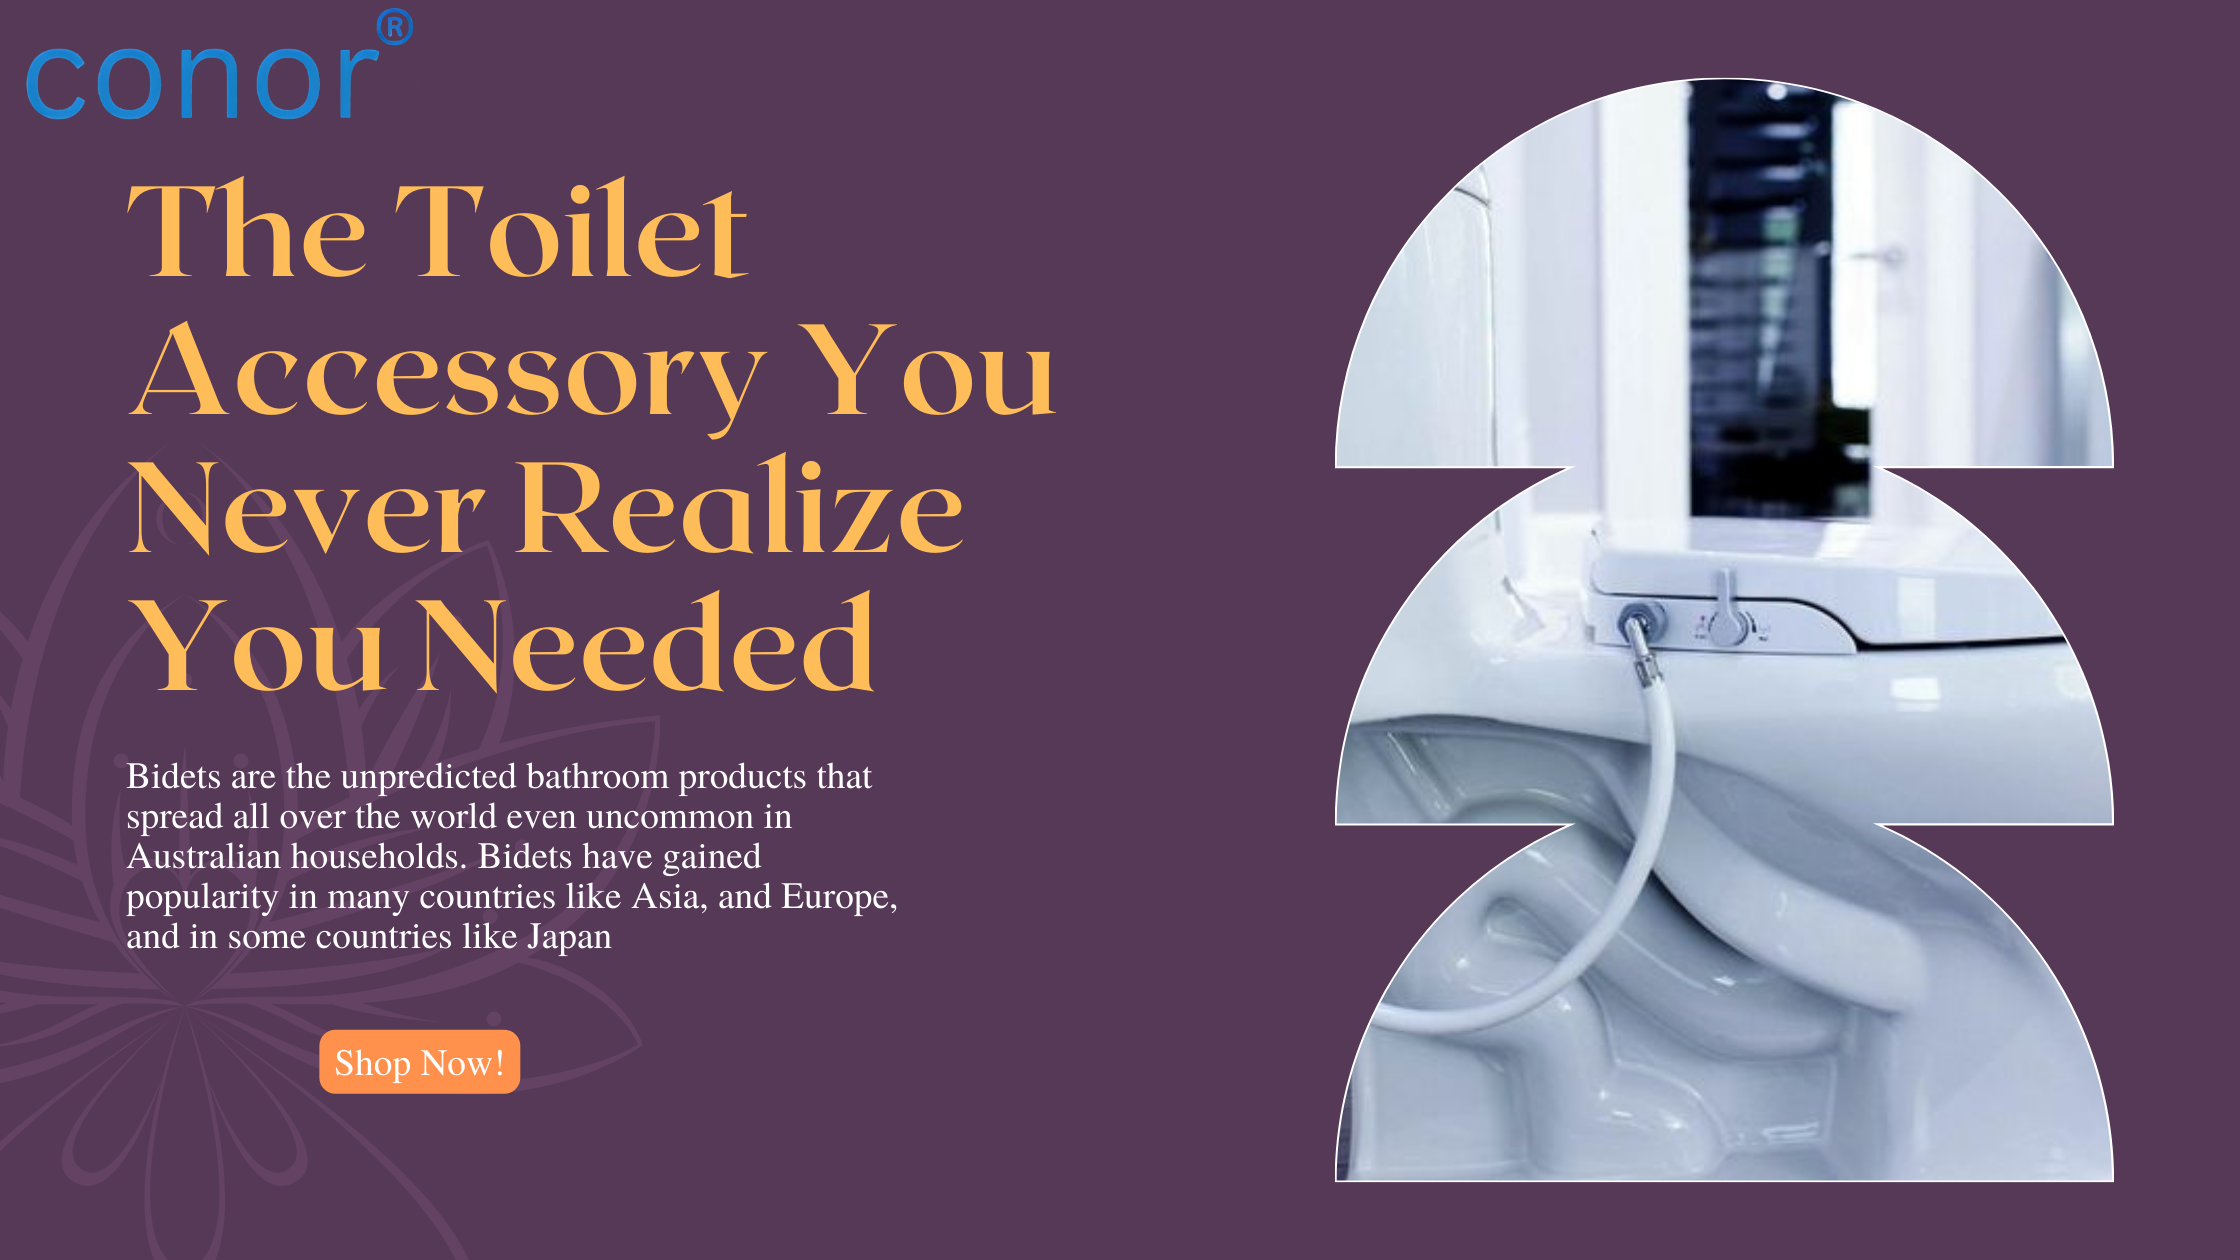 The Toilet Accessory You Never Realize You Needed